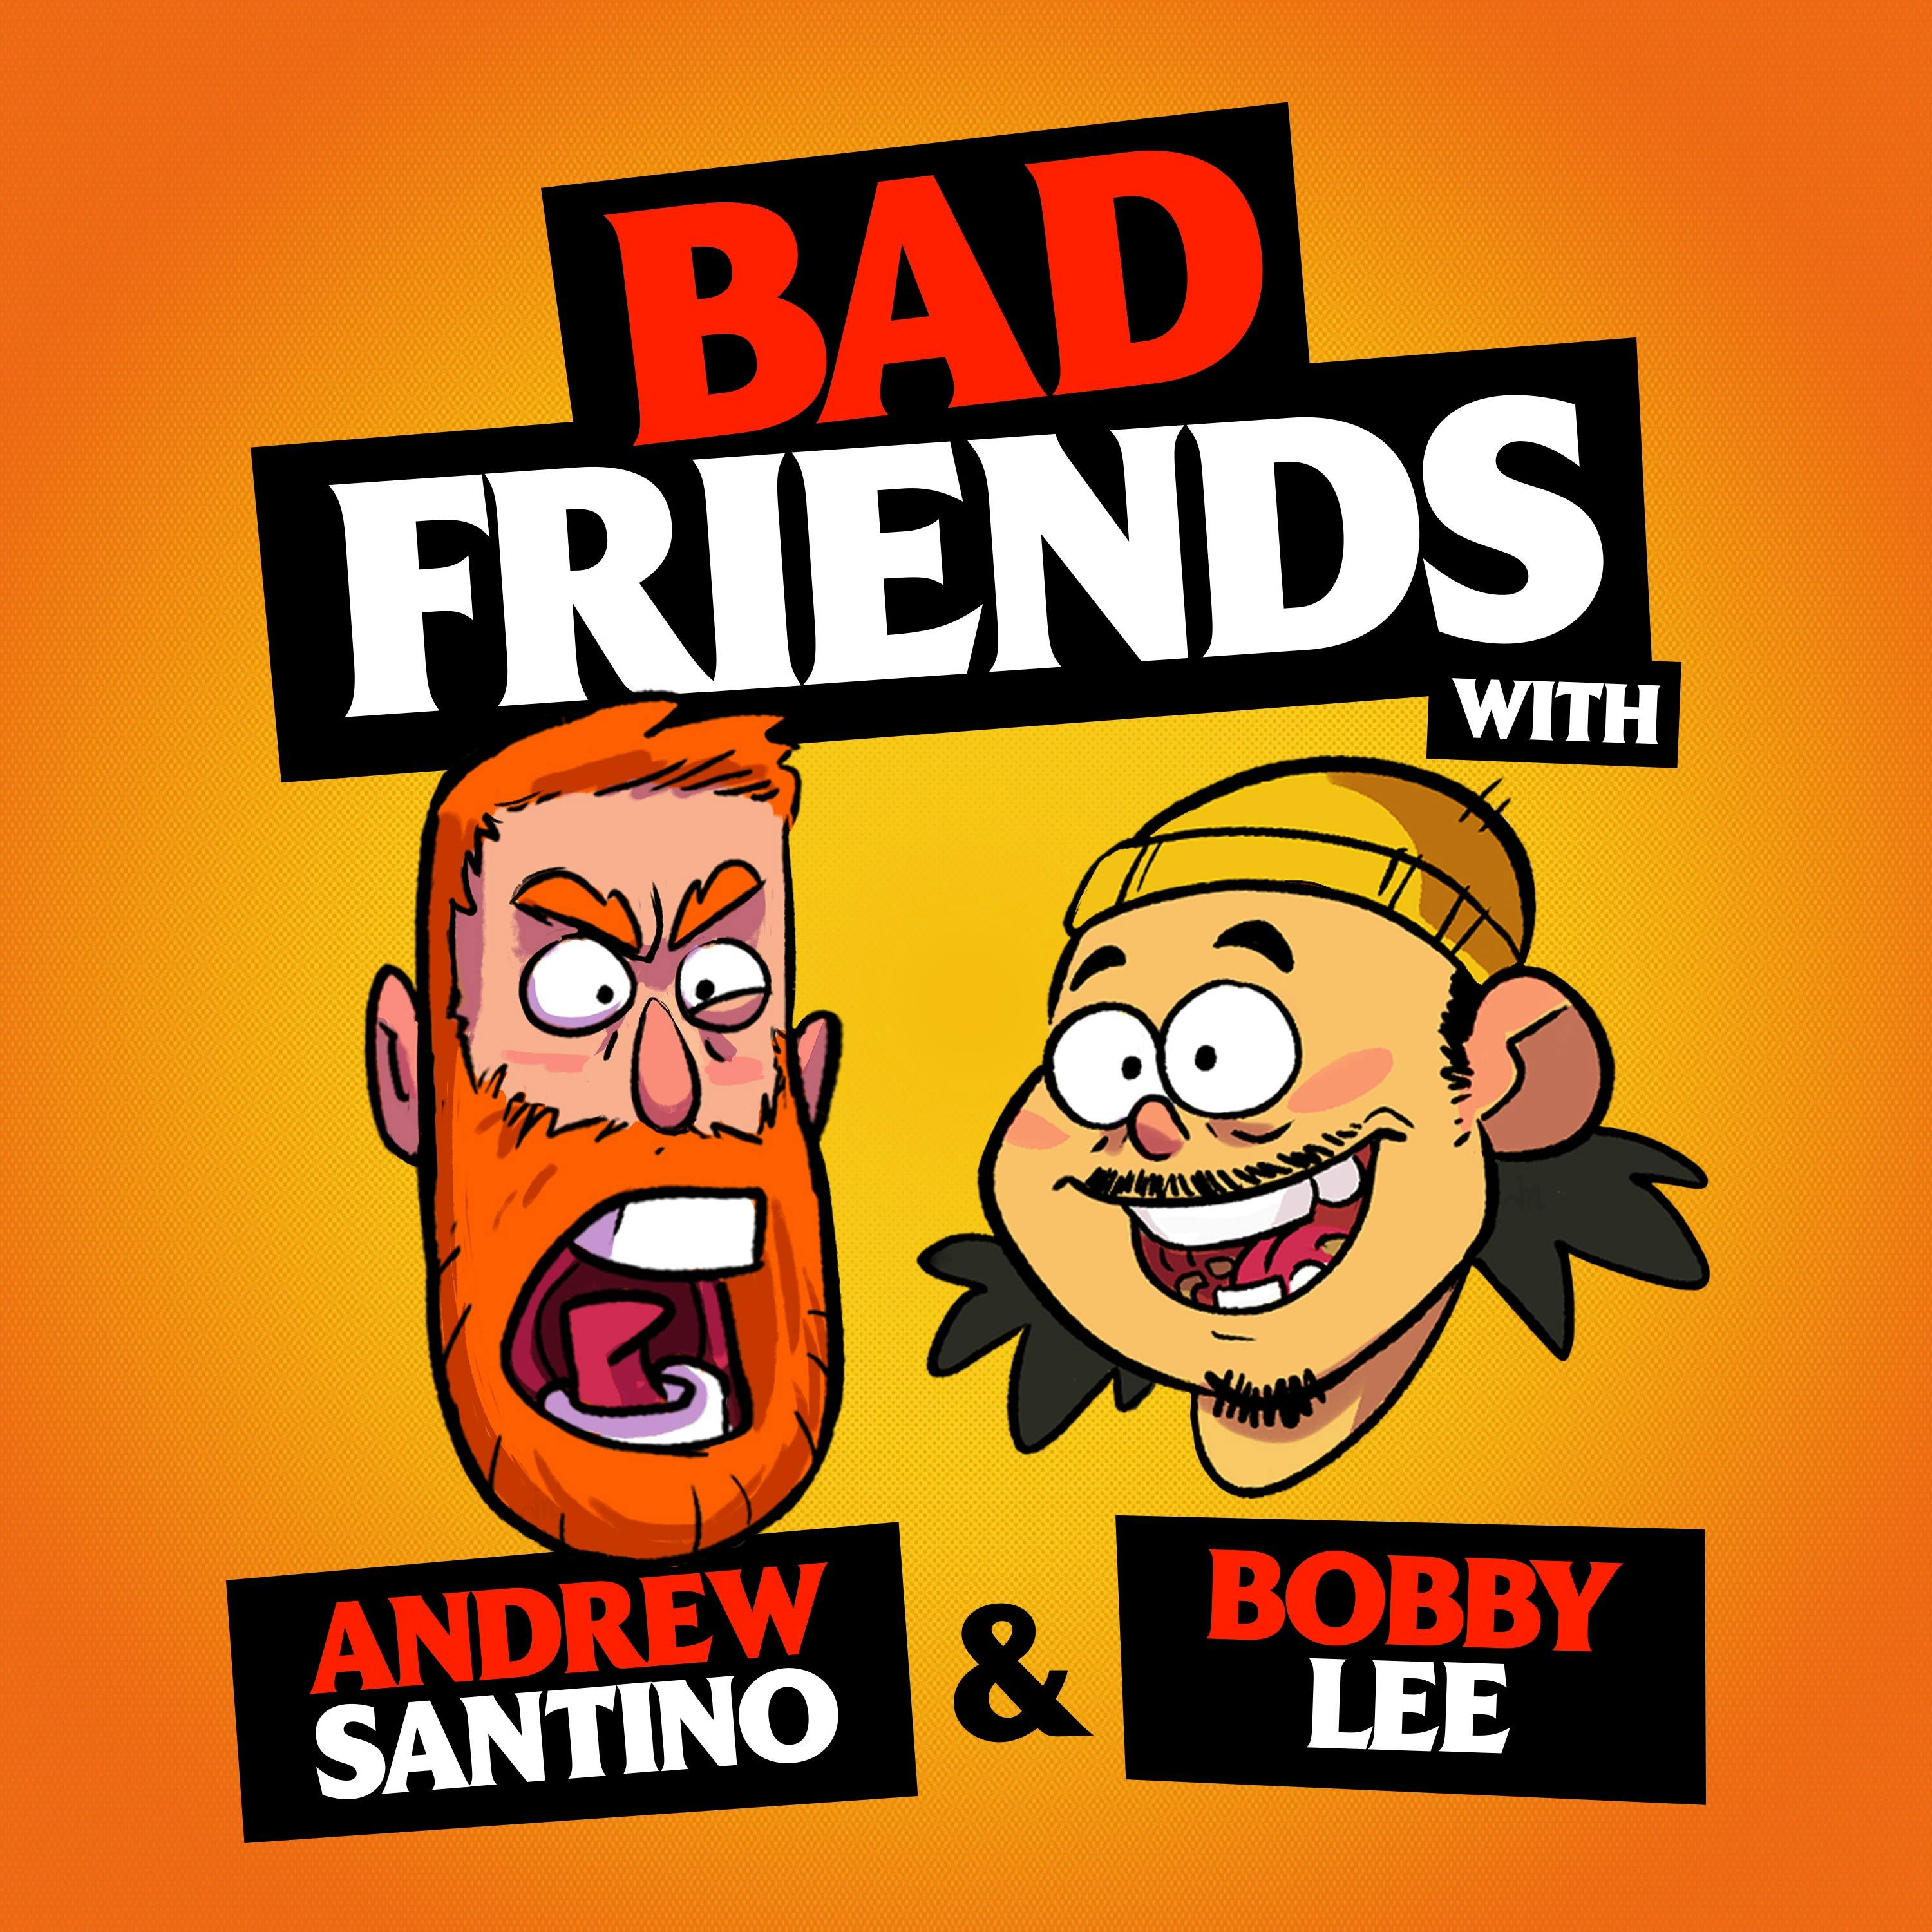 Bobby Fires George by Andrew Santino and Bobby Lee